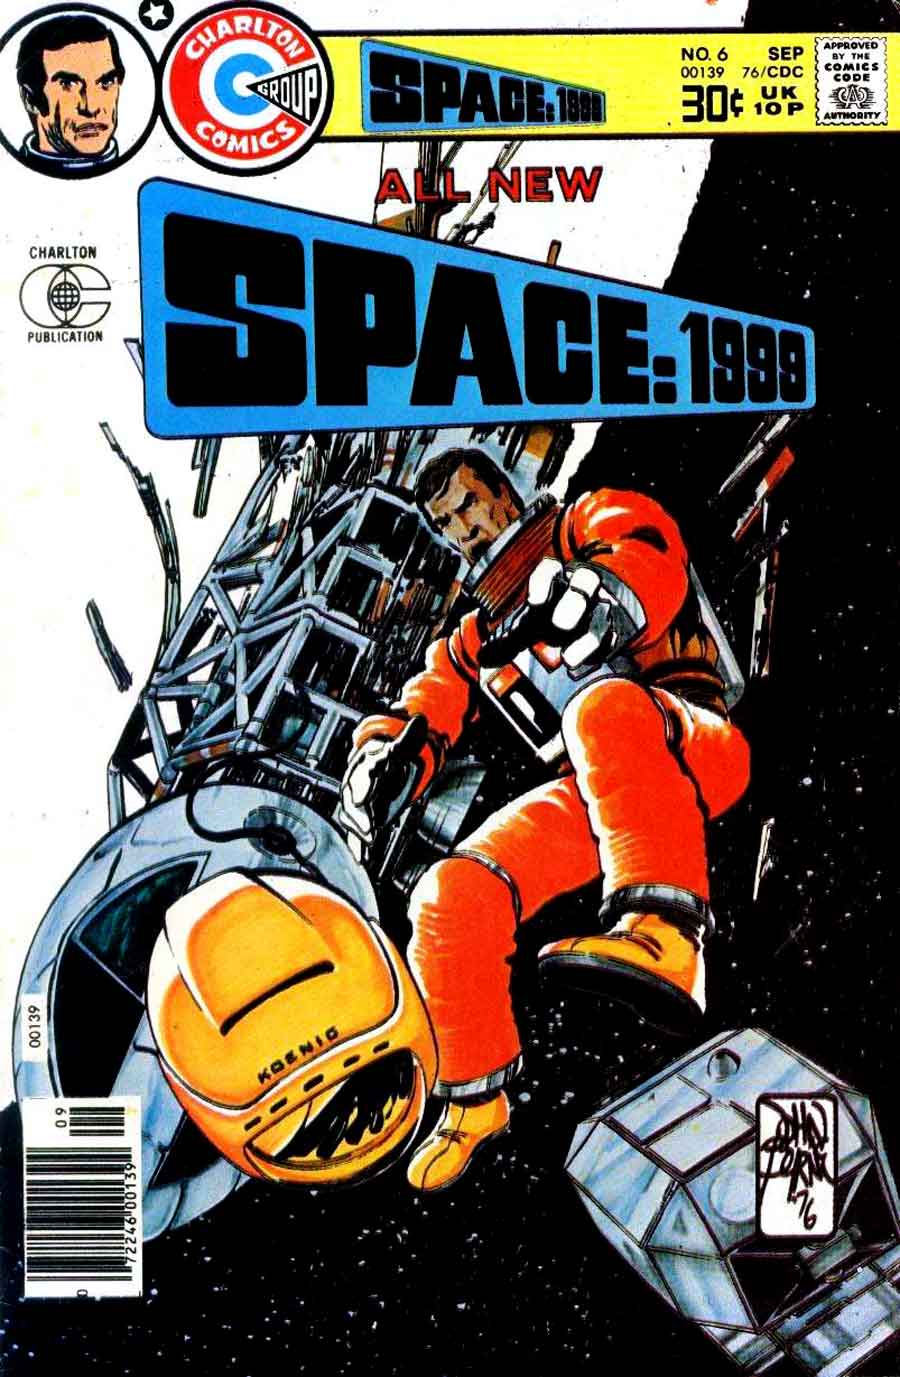 Space 1999 v1 #6 chalrton bronze age comic book cover art by John Byrne